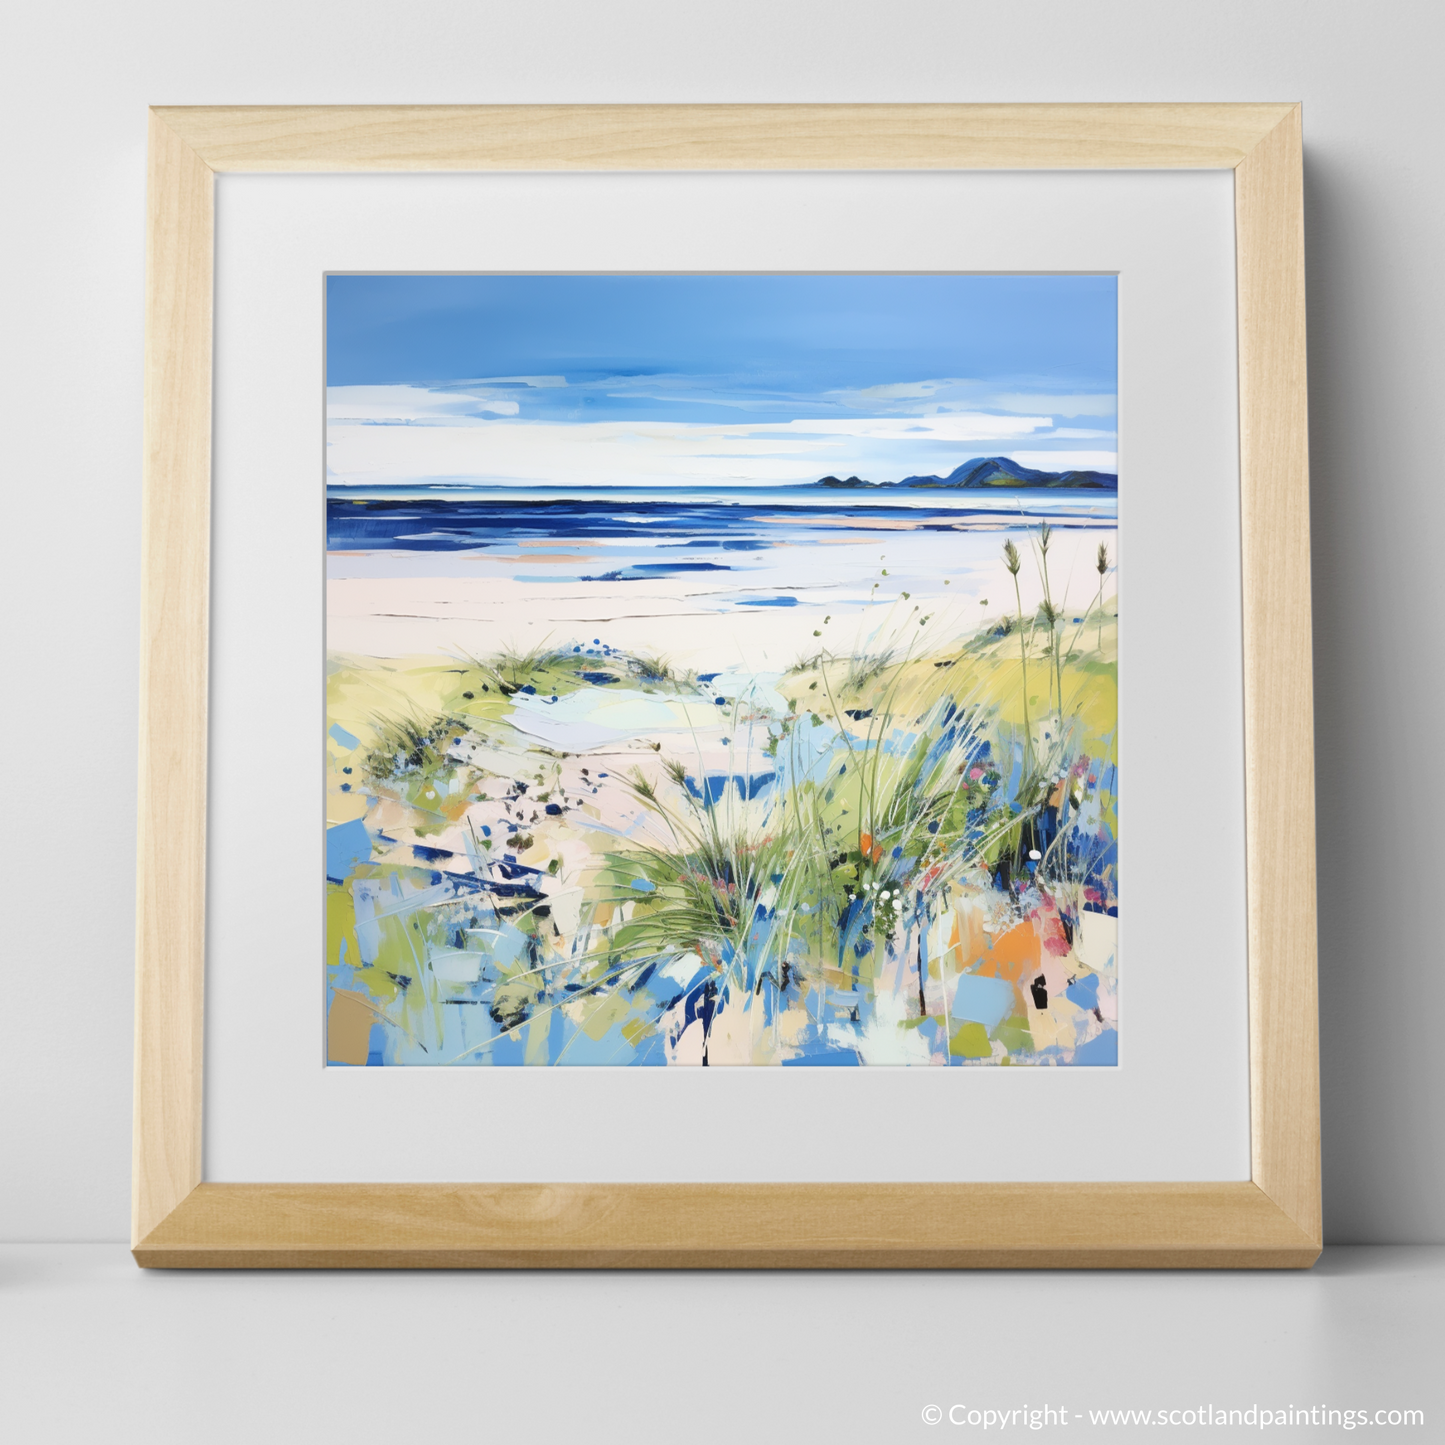 Art Print of Longniddry Beach, East Lothian in summer with a natural frame